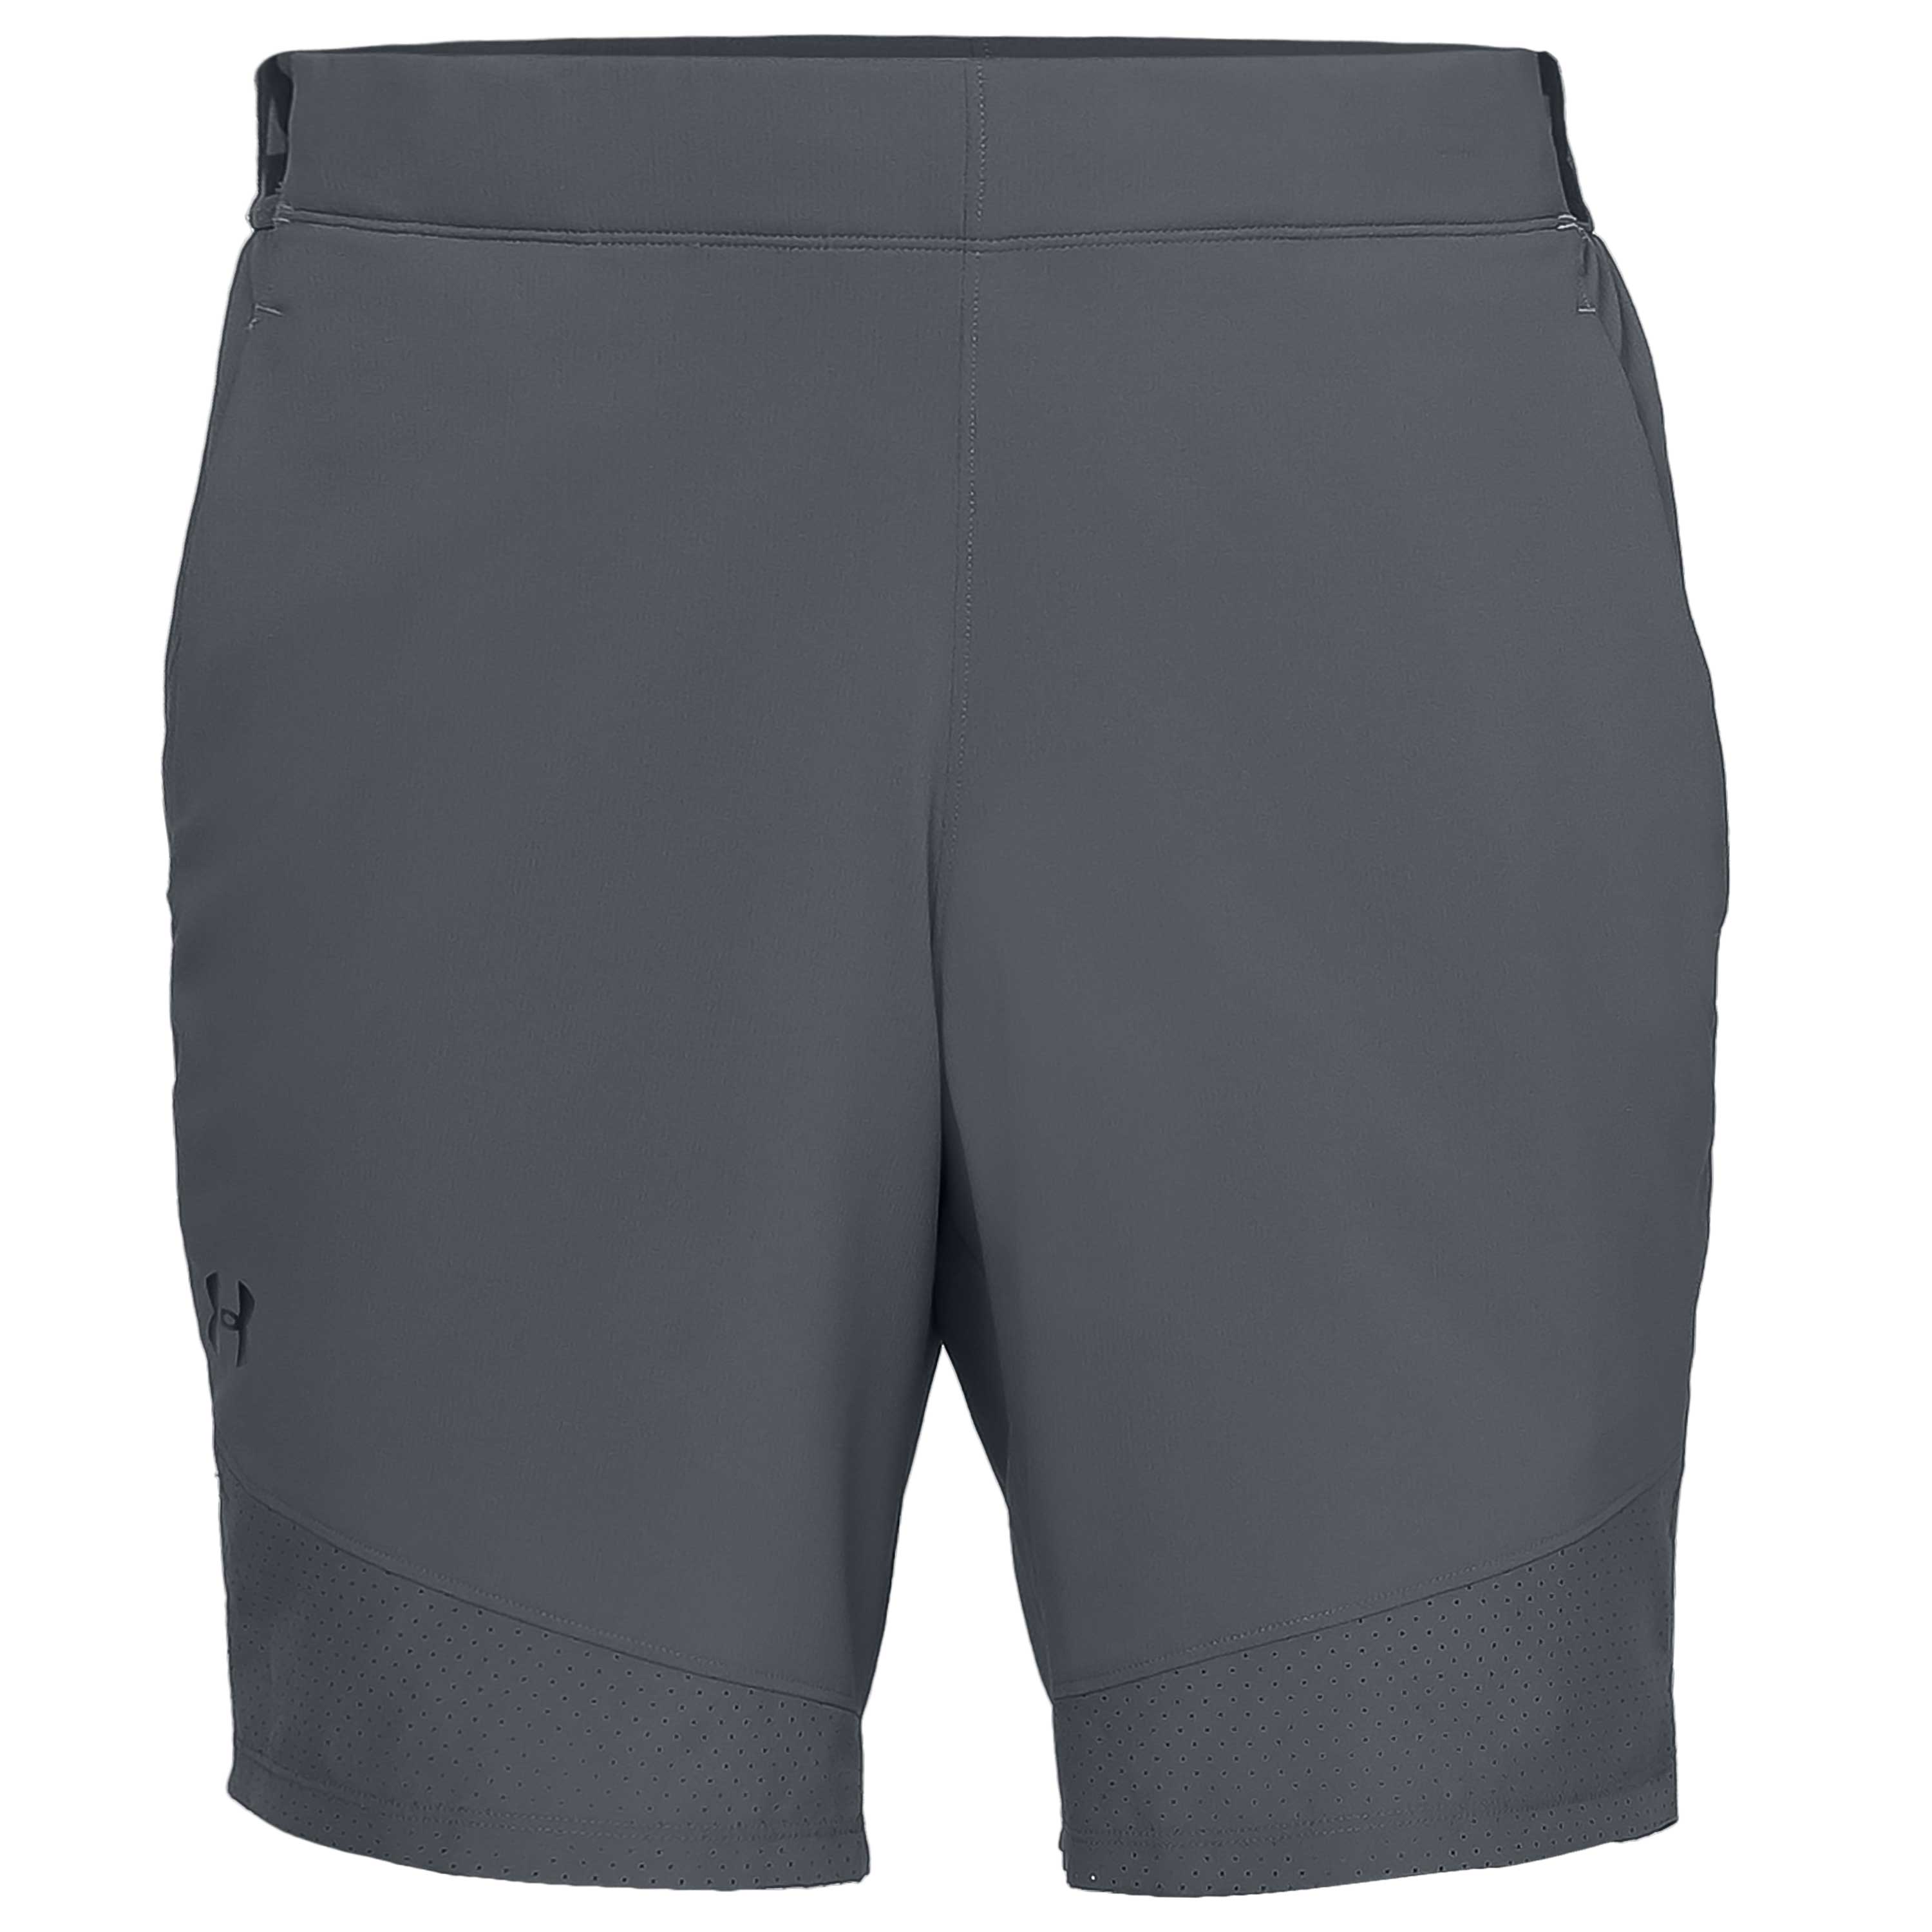 fitted under armour shorts